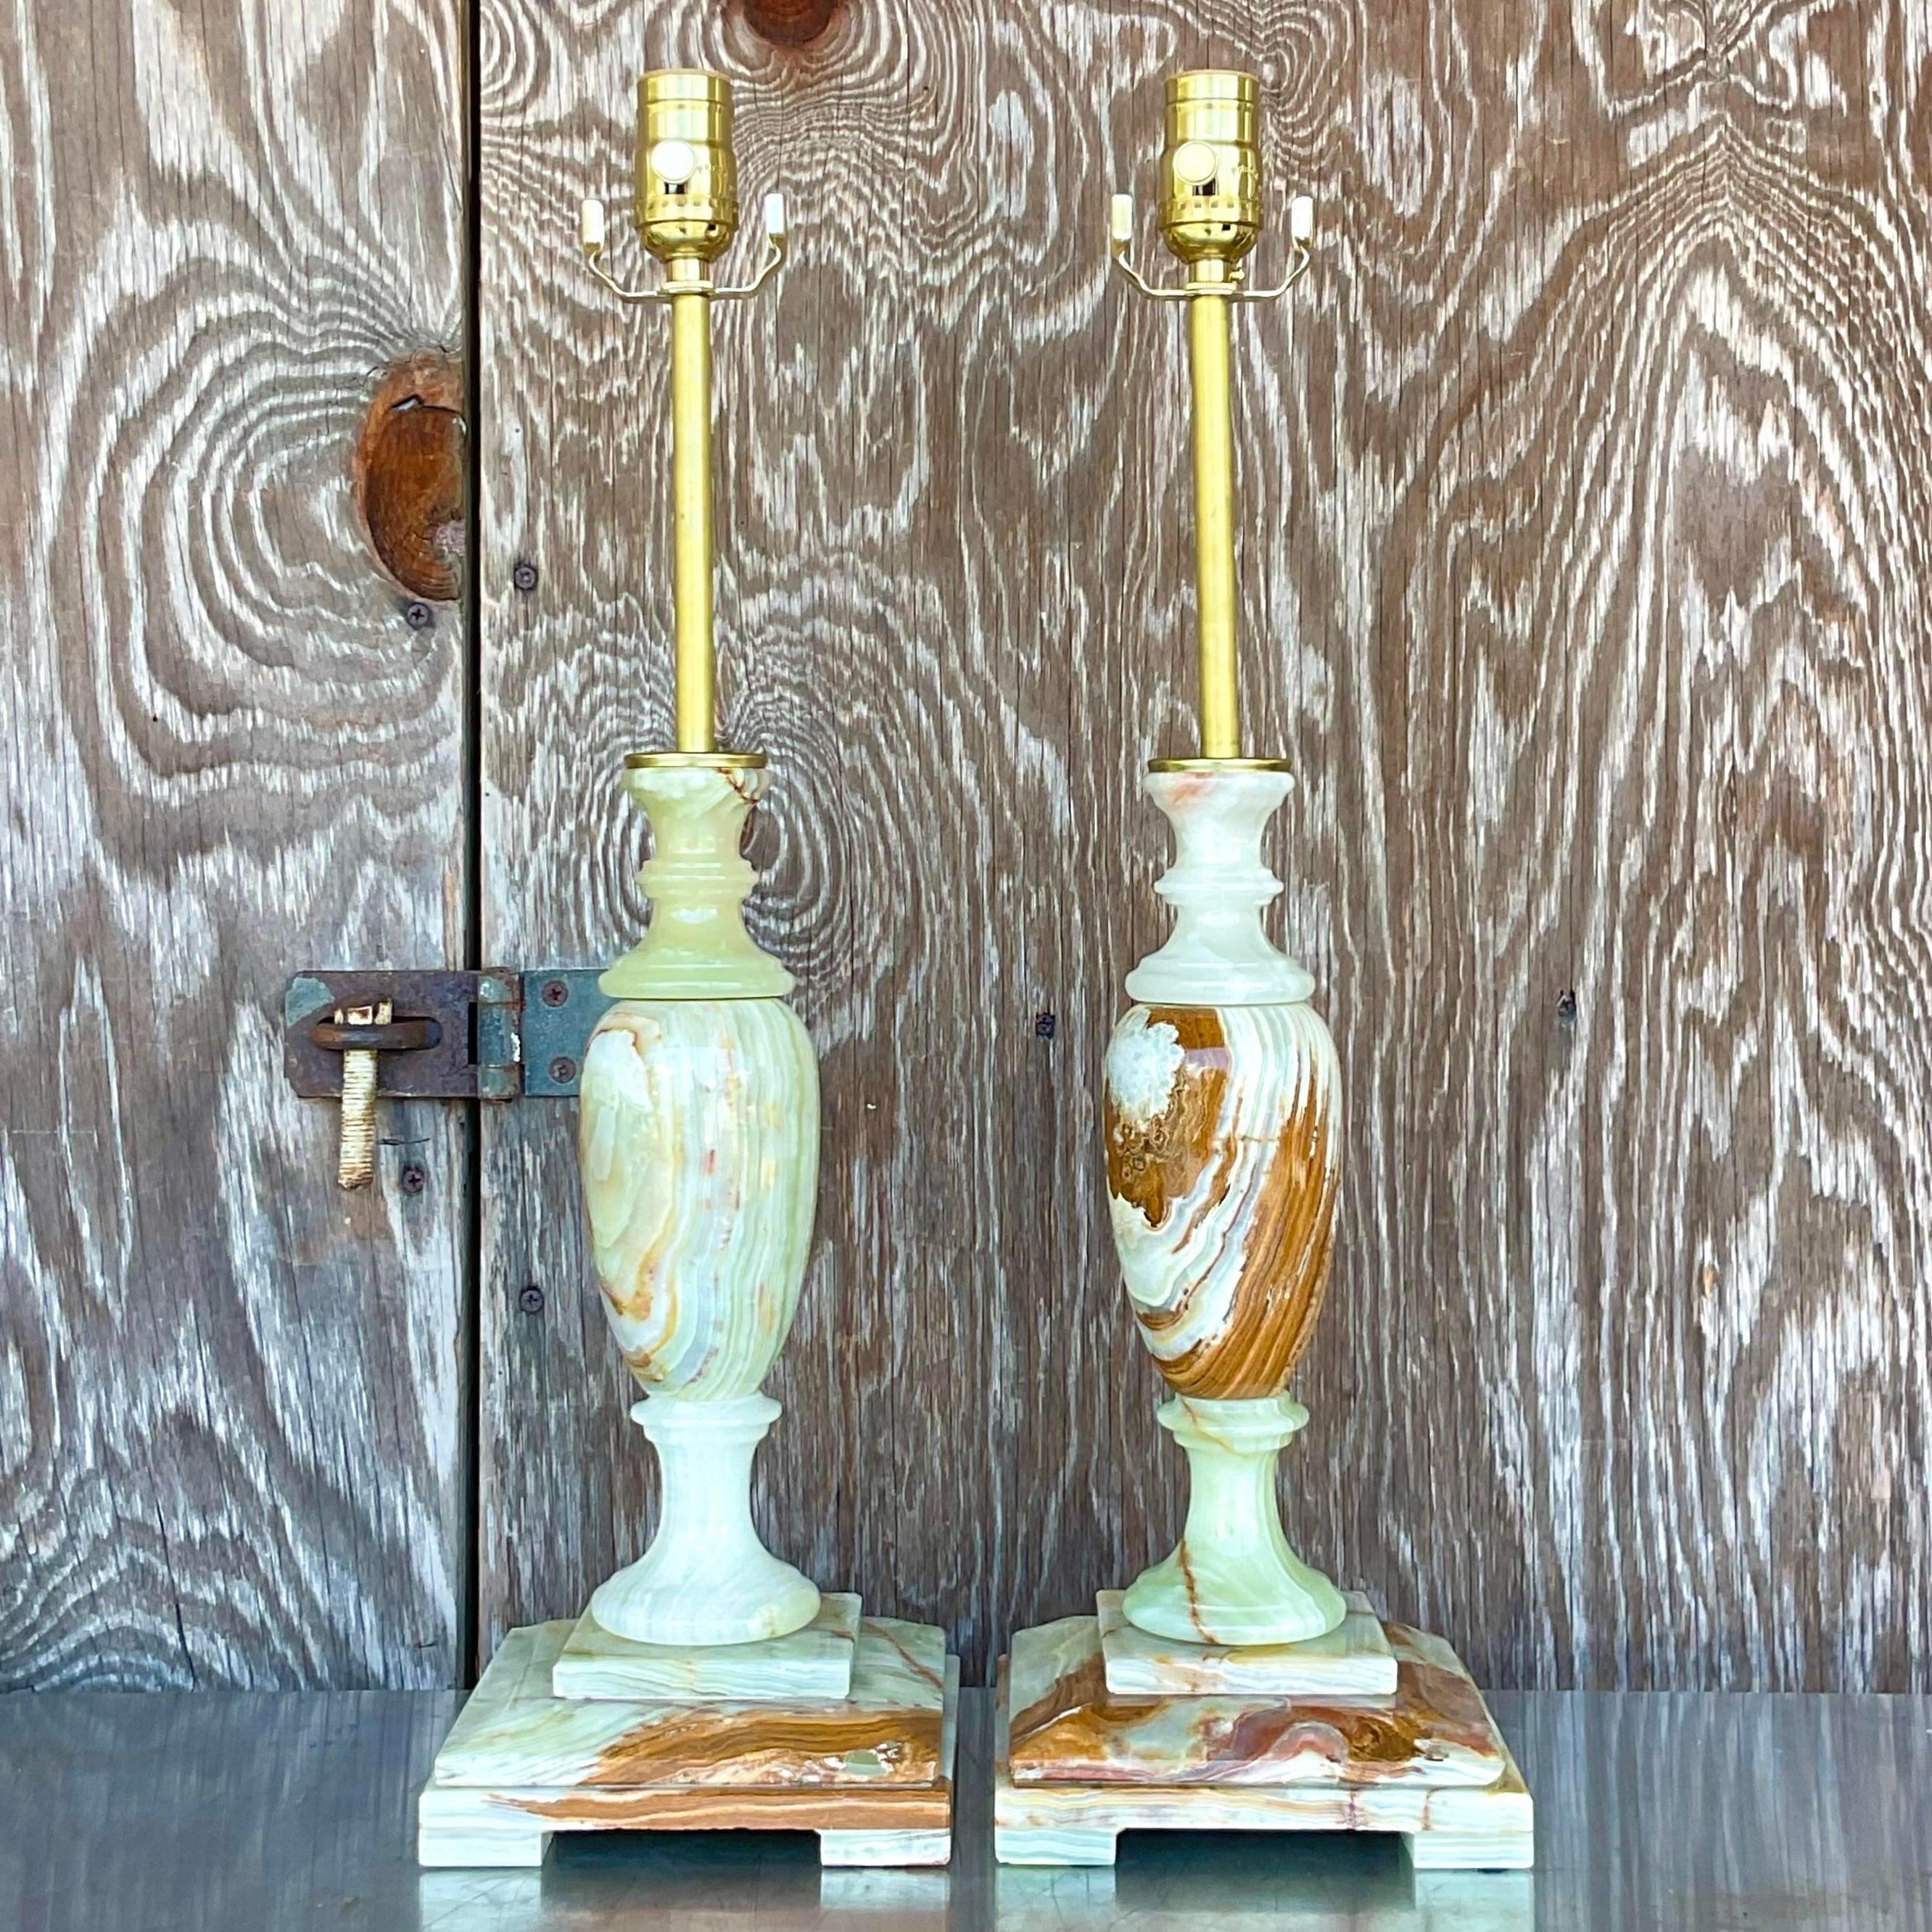 American Vintage Regency Onyx Candlestick Lamps - a Pair For Sale